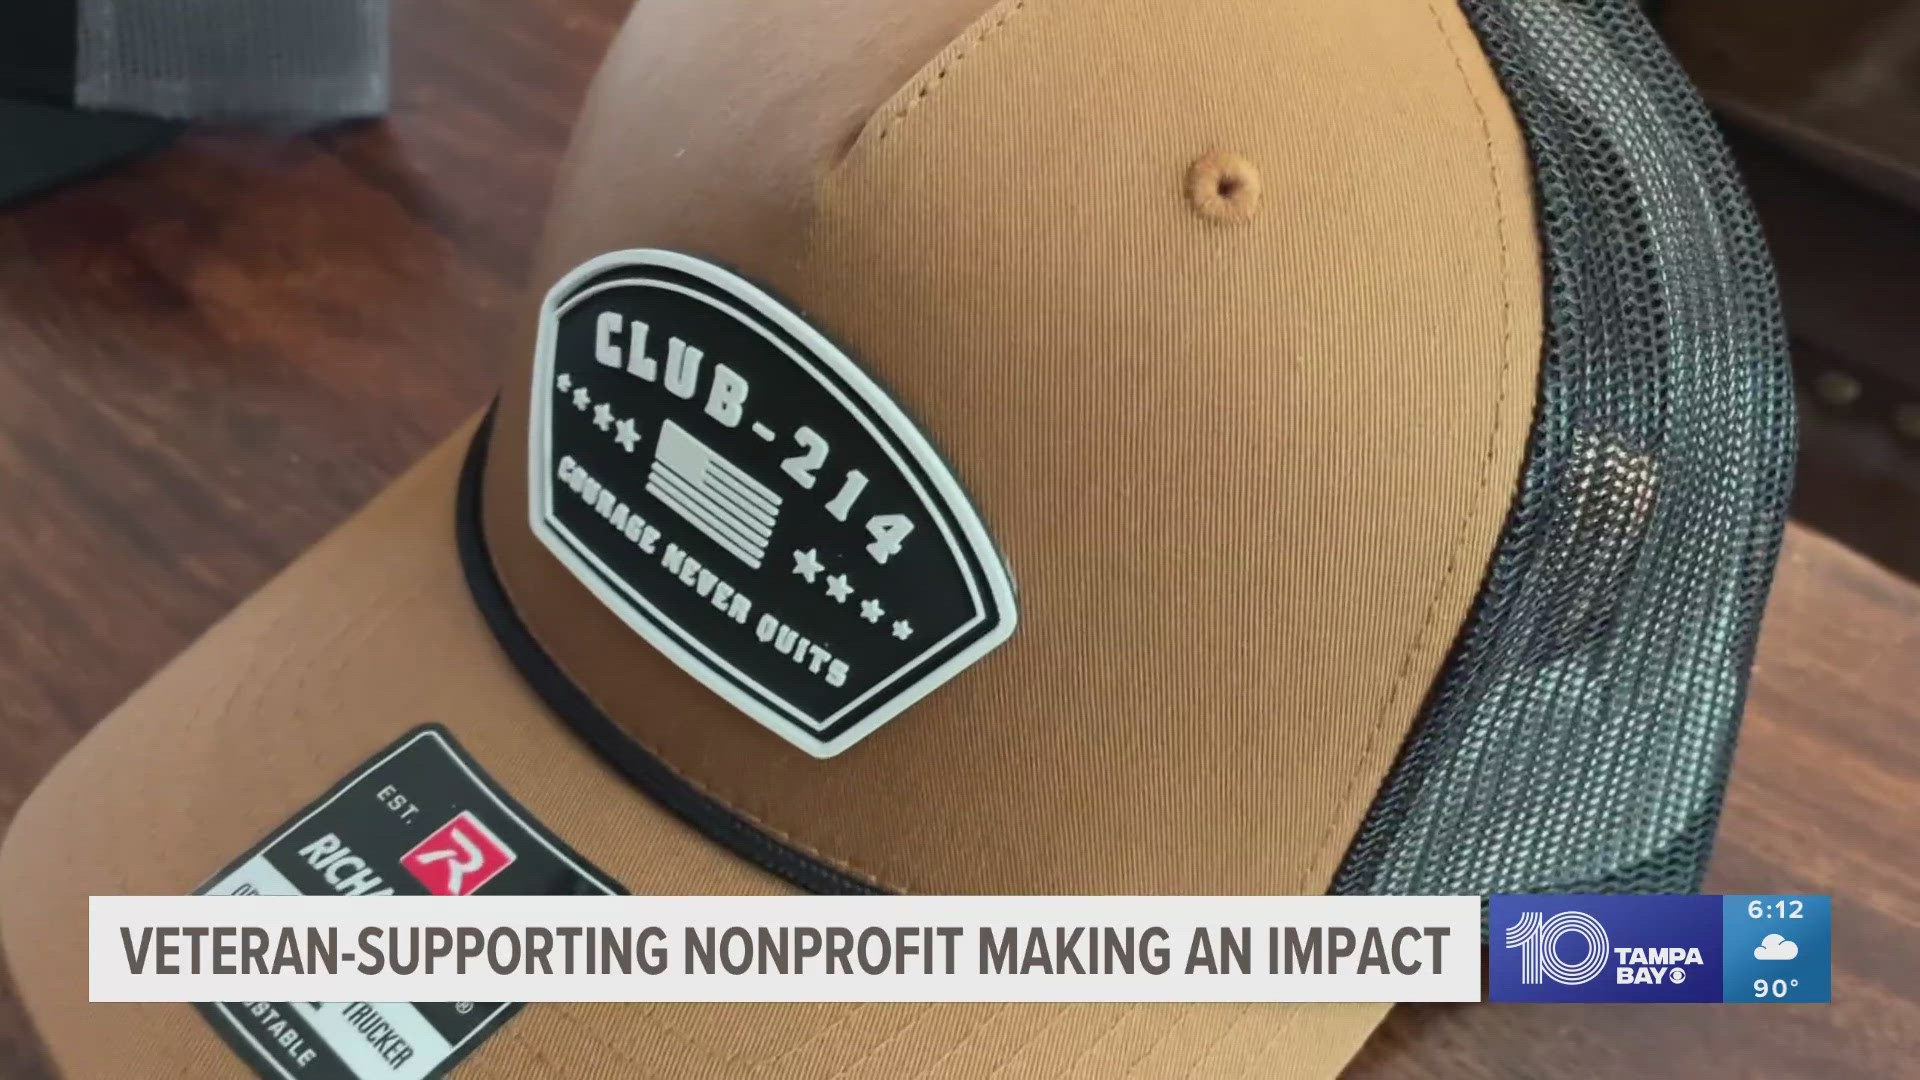 The Club-214 clothing brand is helping create bonds between thousands of local veterans.